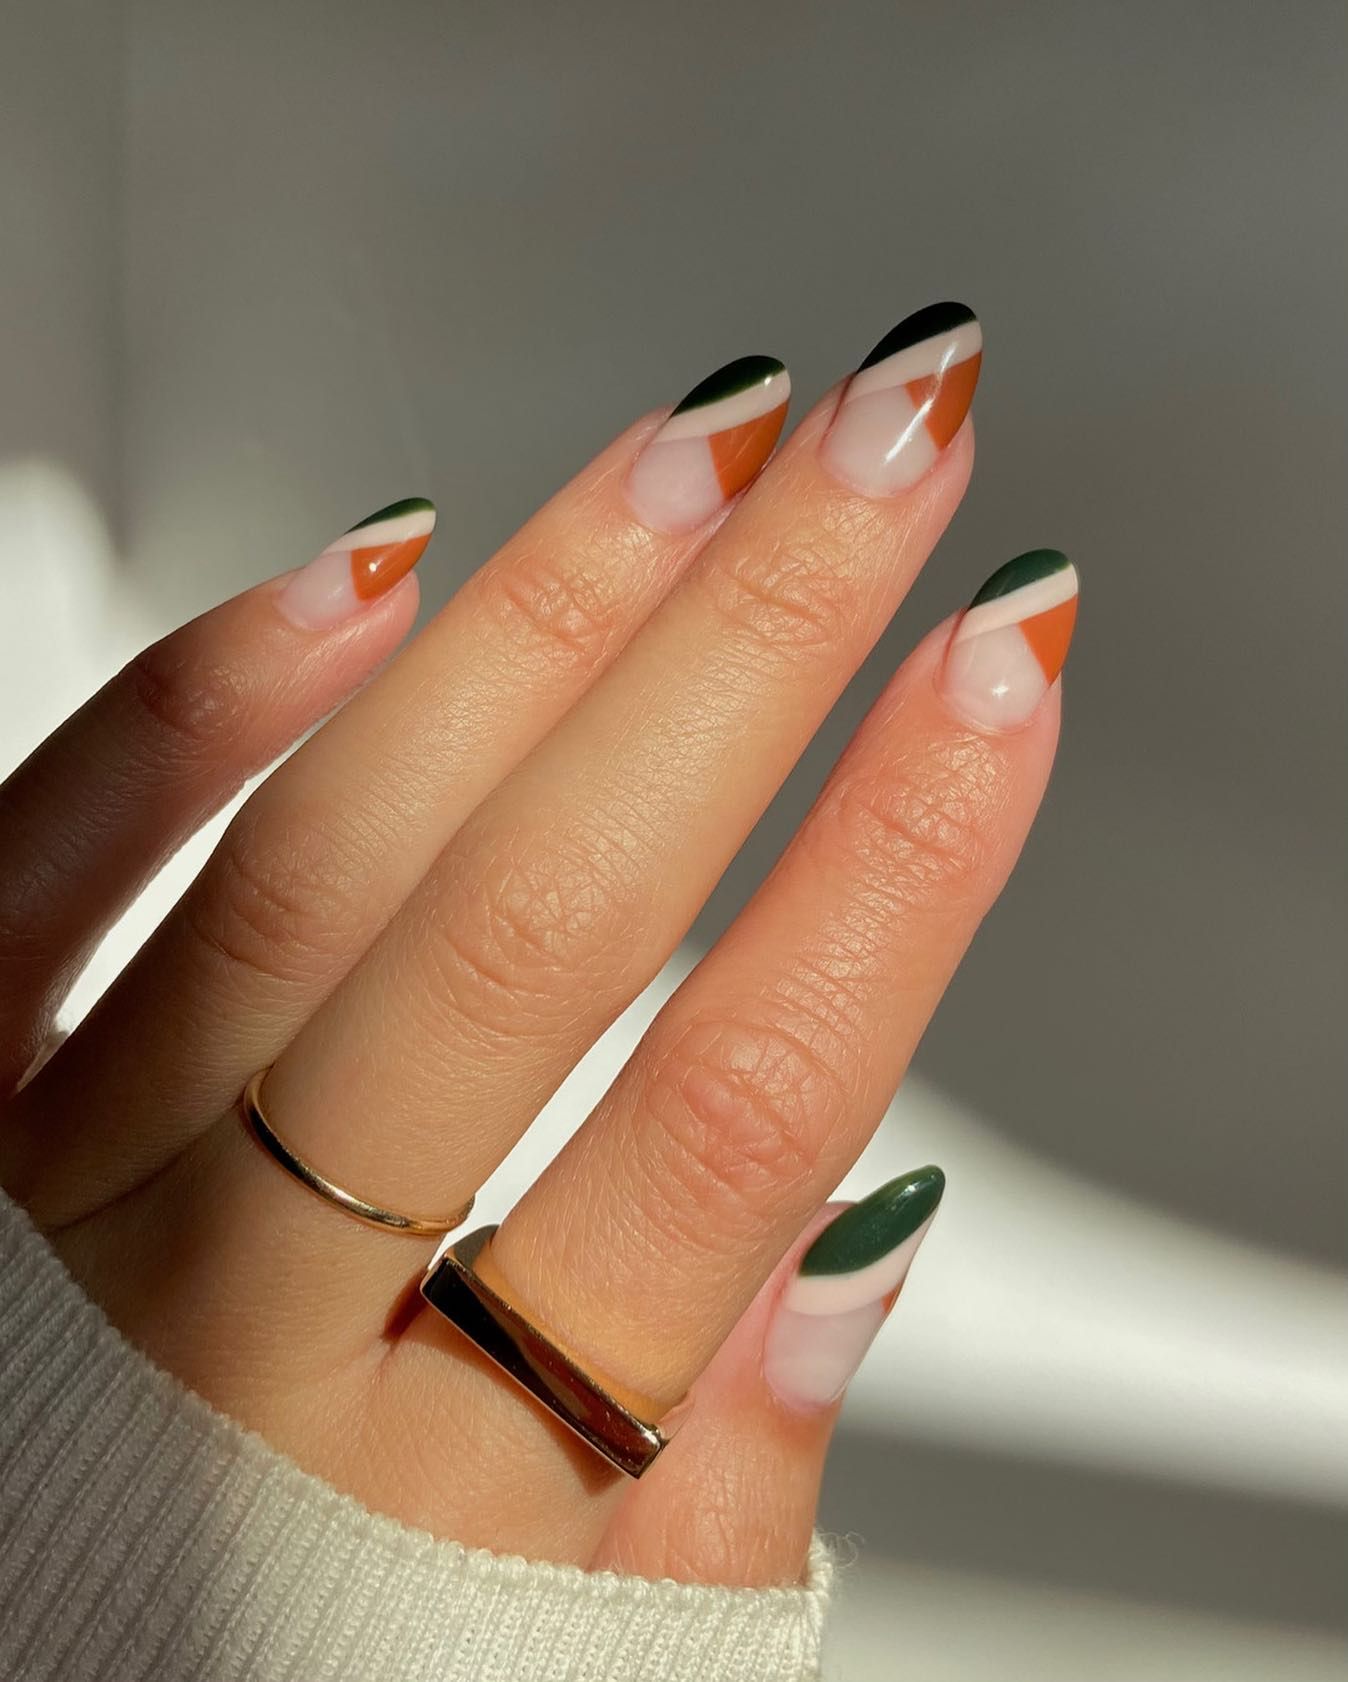 Top more than 155 fall 2018 nail trends super hot